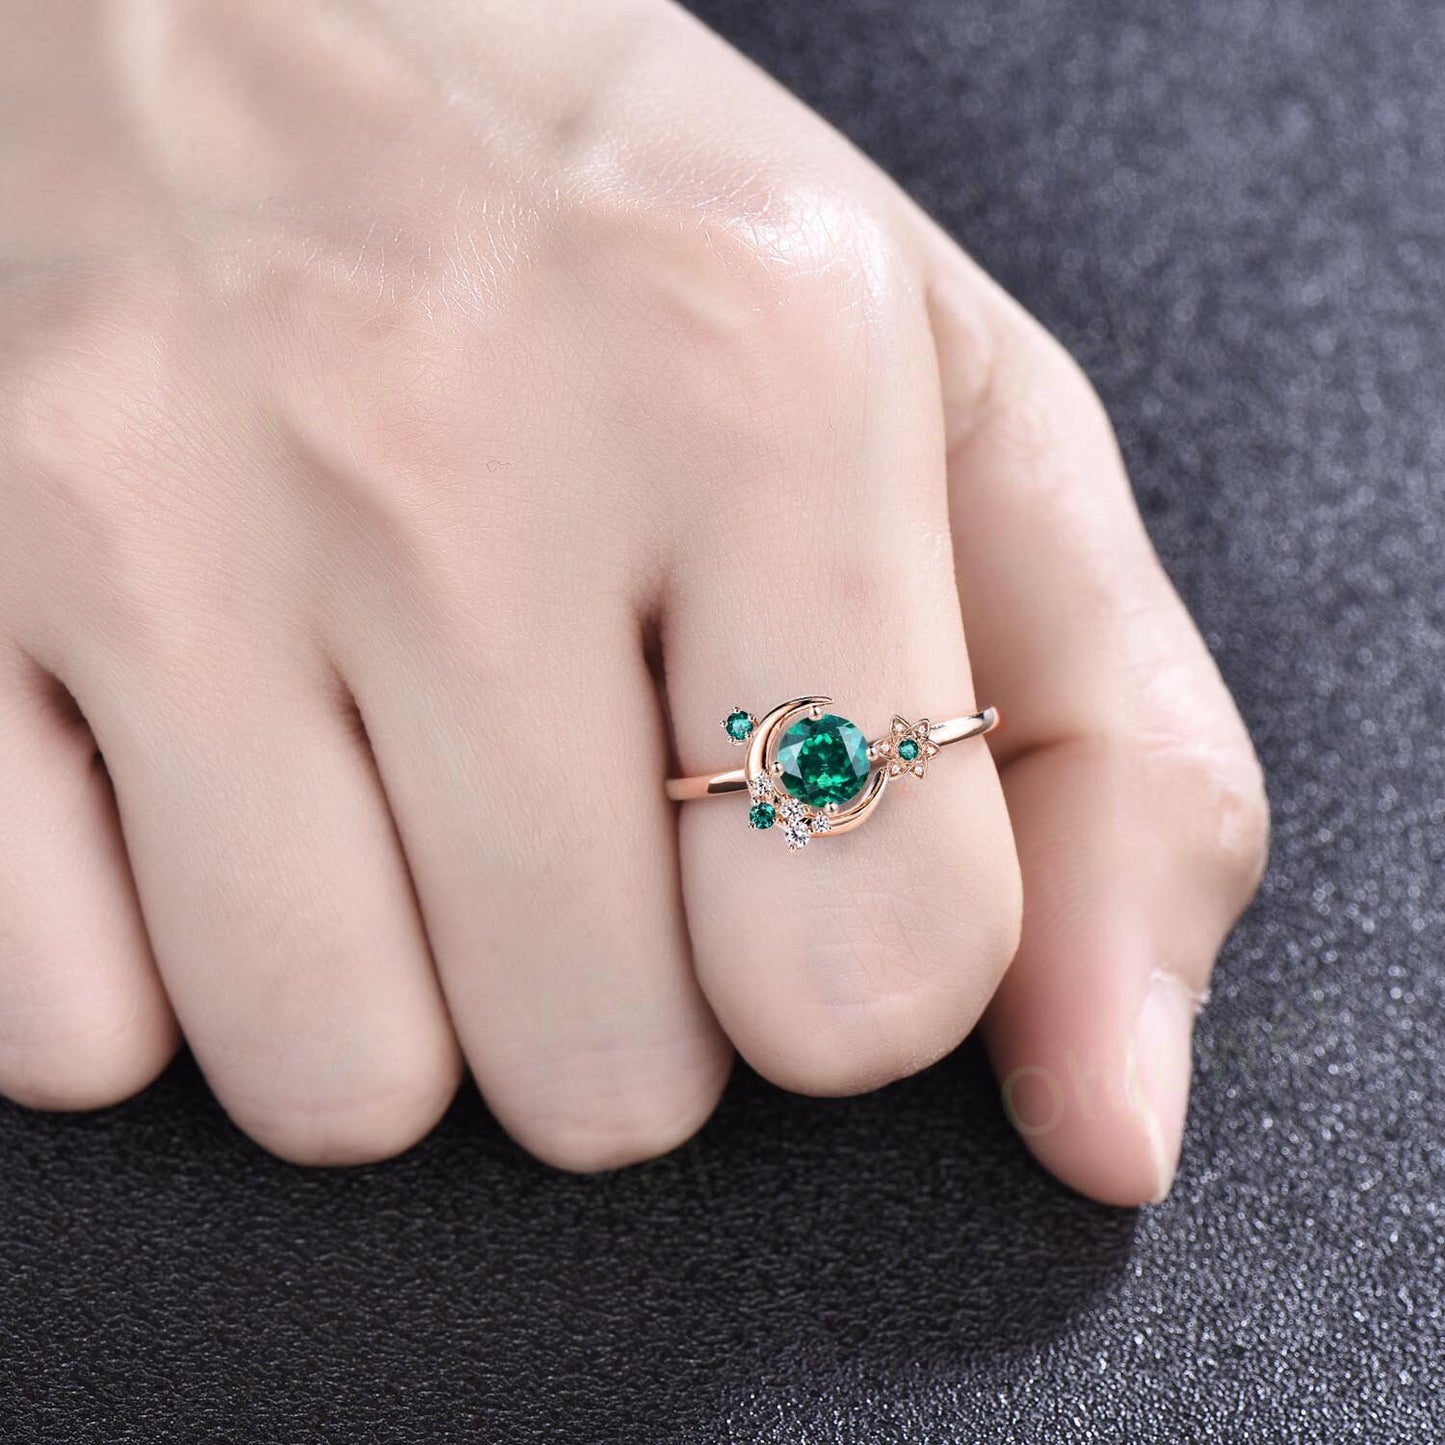 Vintage round green emerald engagement ring solid 14k rose gold cluster moon star diamond ring women flower dainty anniversary ring gift